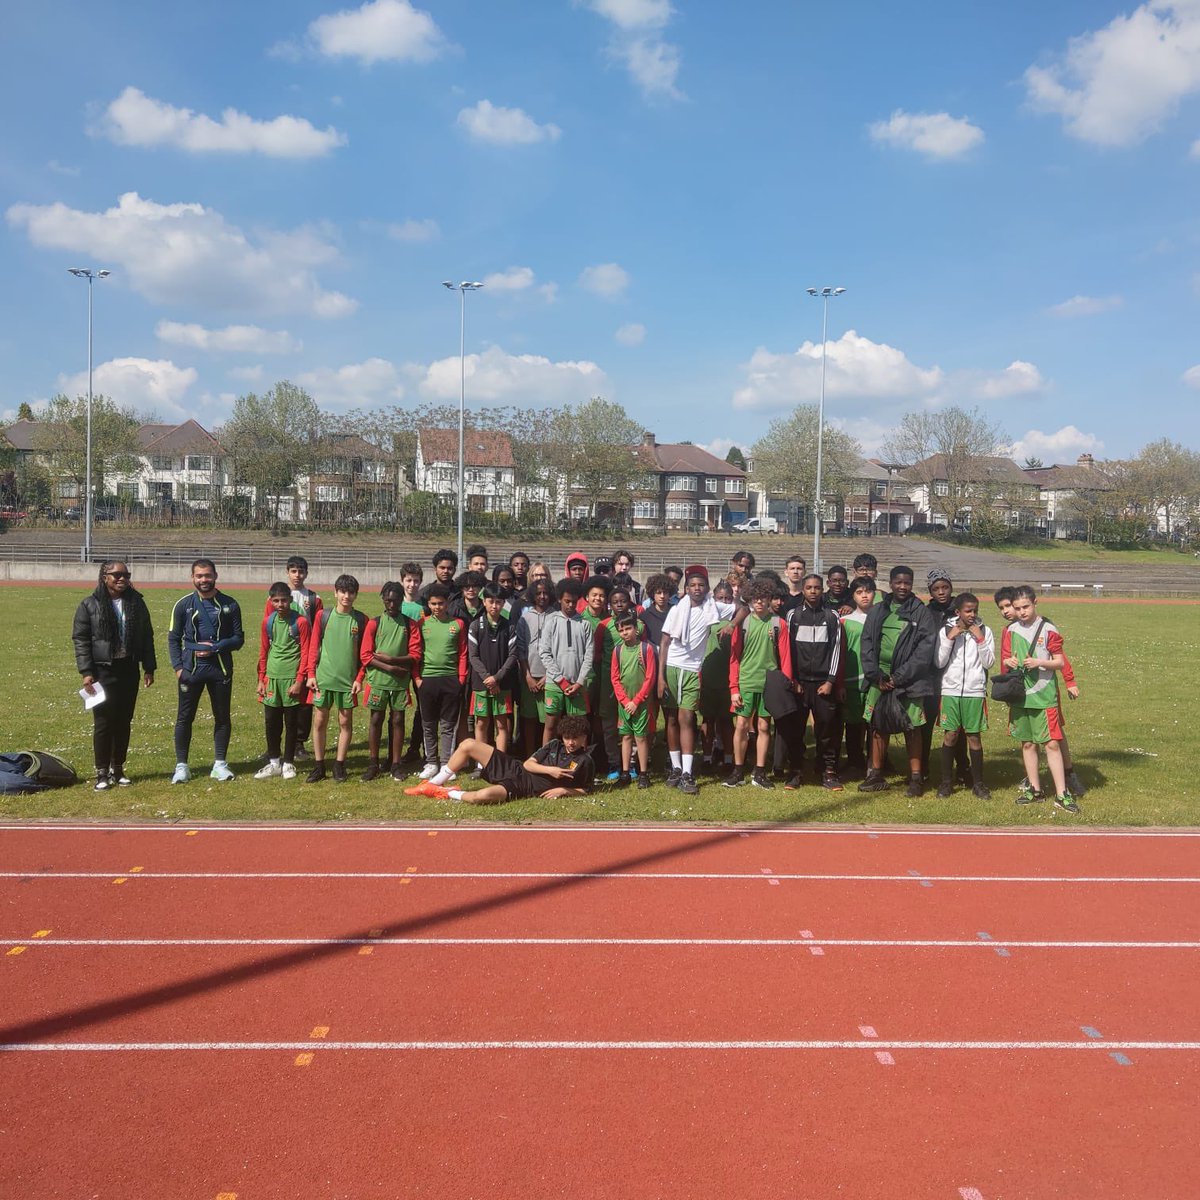 #brentathletics Well done to all our athletes! A huge congratulations to Year 10 for winning the cup against 13 other schools. @BritAthletics @TrackAcademy @JasonRobertsFdn @UcheIkpeazu